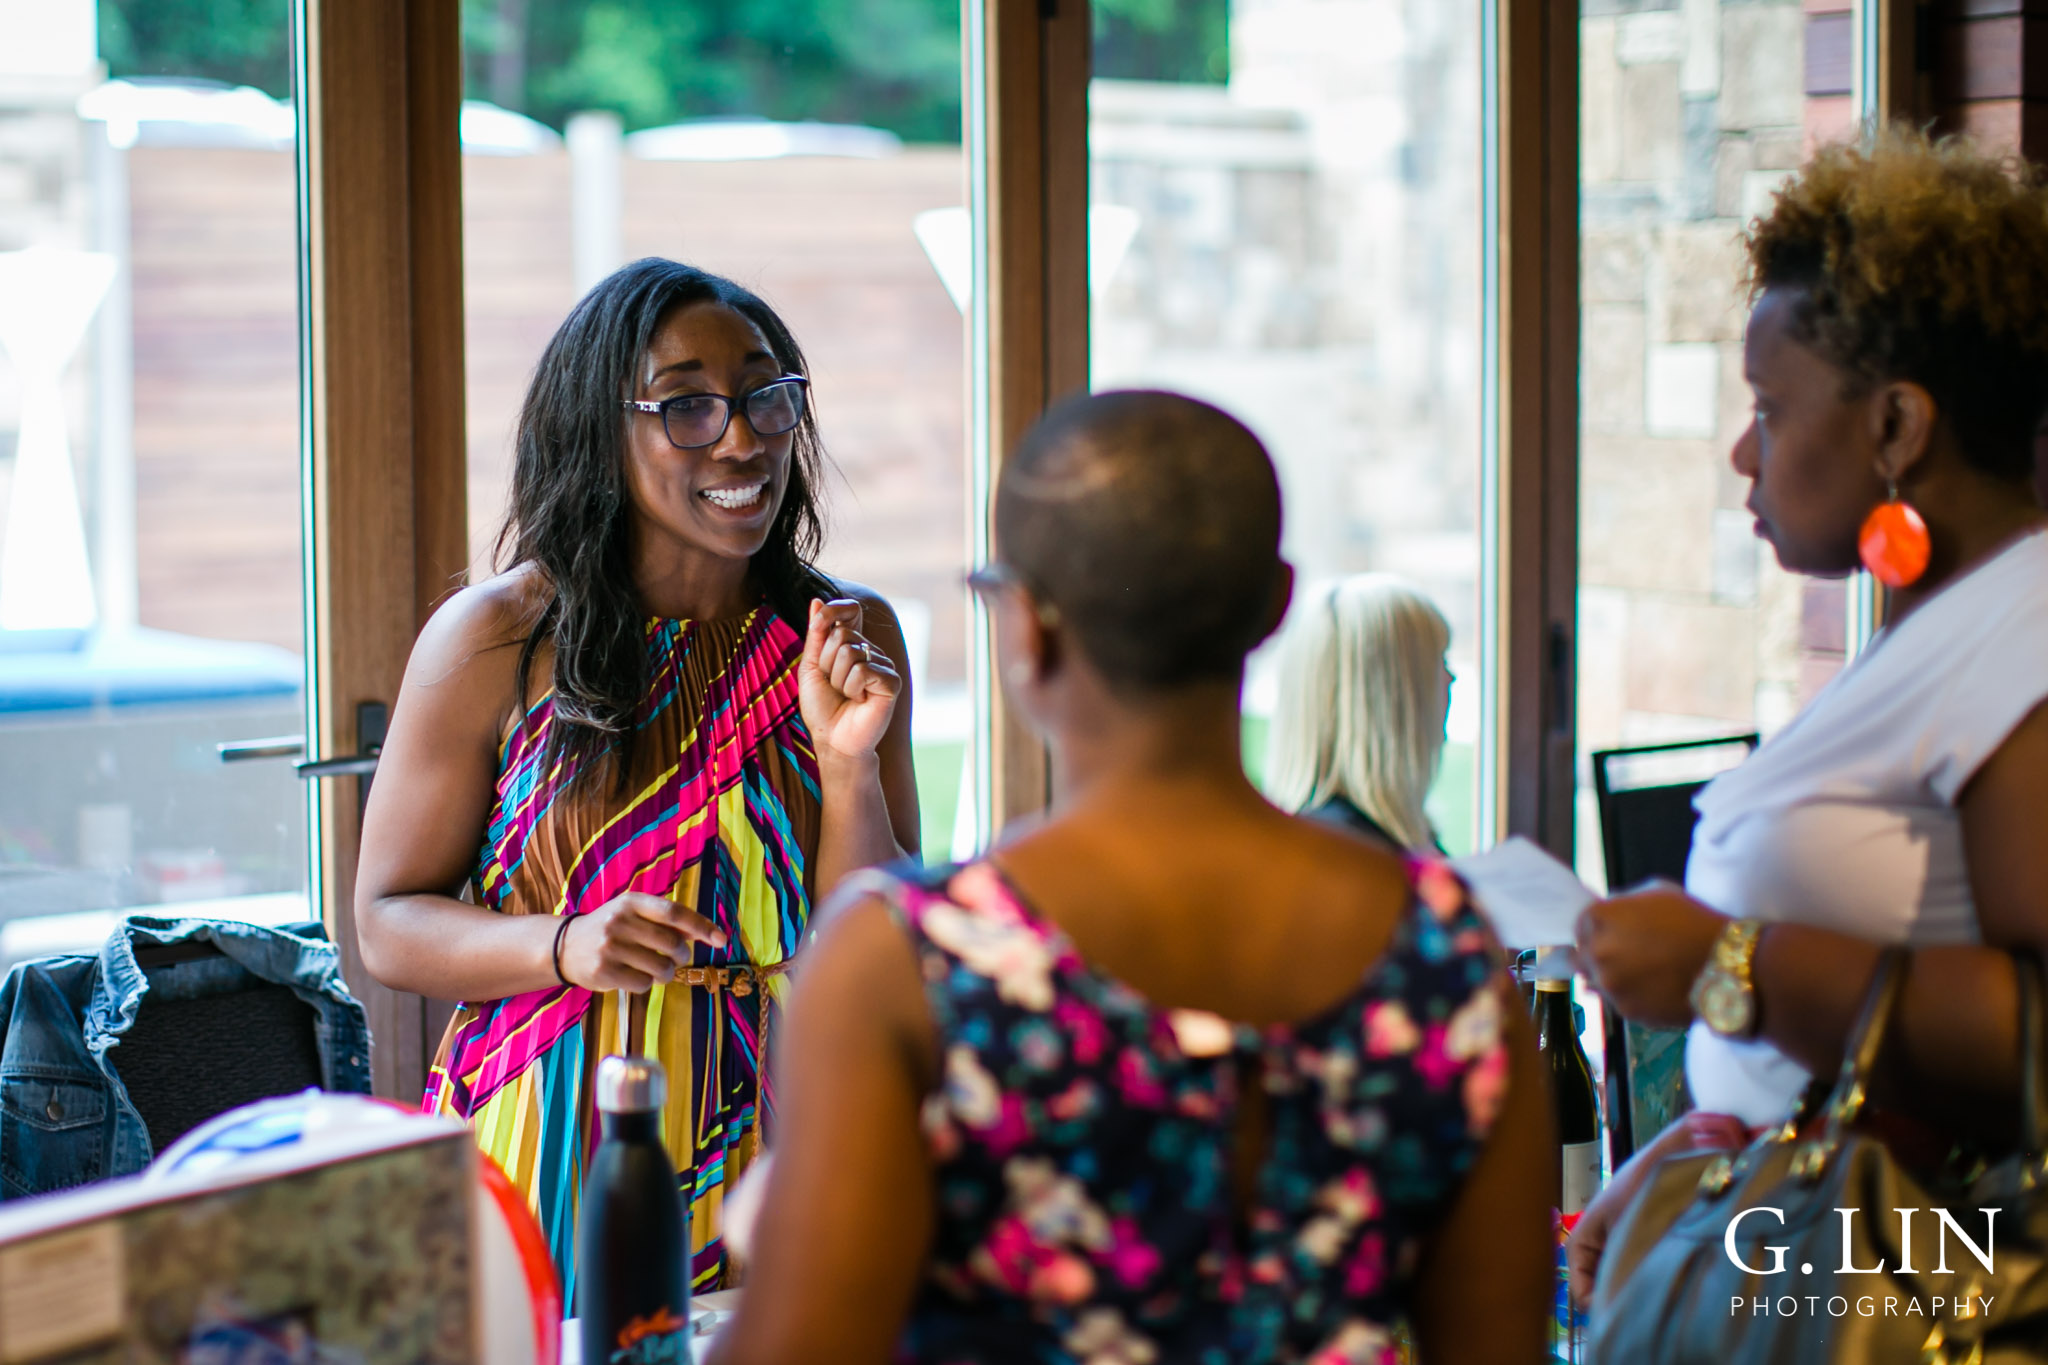 Raleigh Event Photographer | G. Lin Photography | Woman standing at table and providing advice to guests